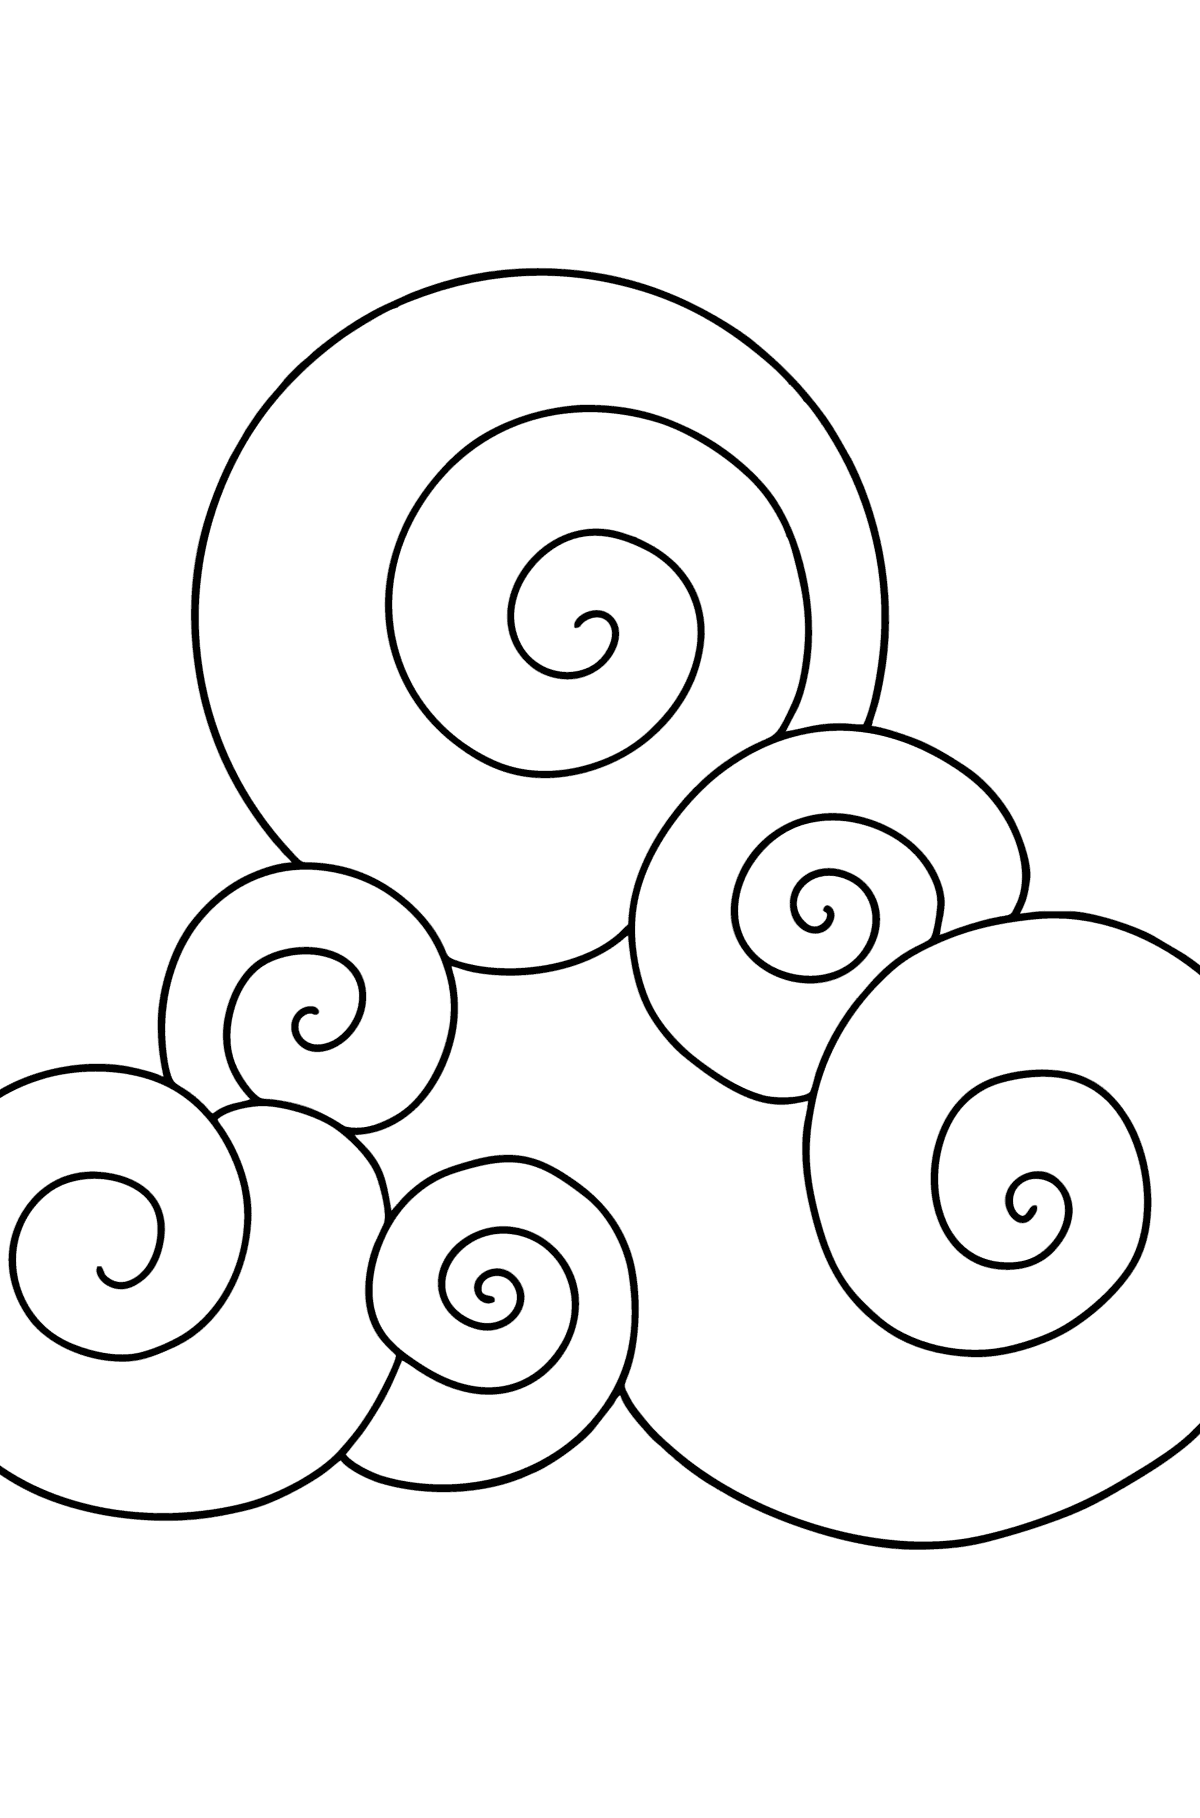 Simple Zen clouds coloring page - Coloring Pages for Kids